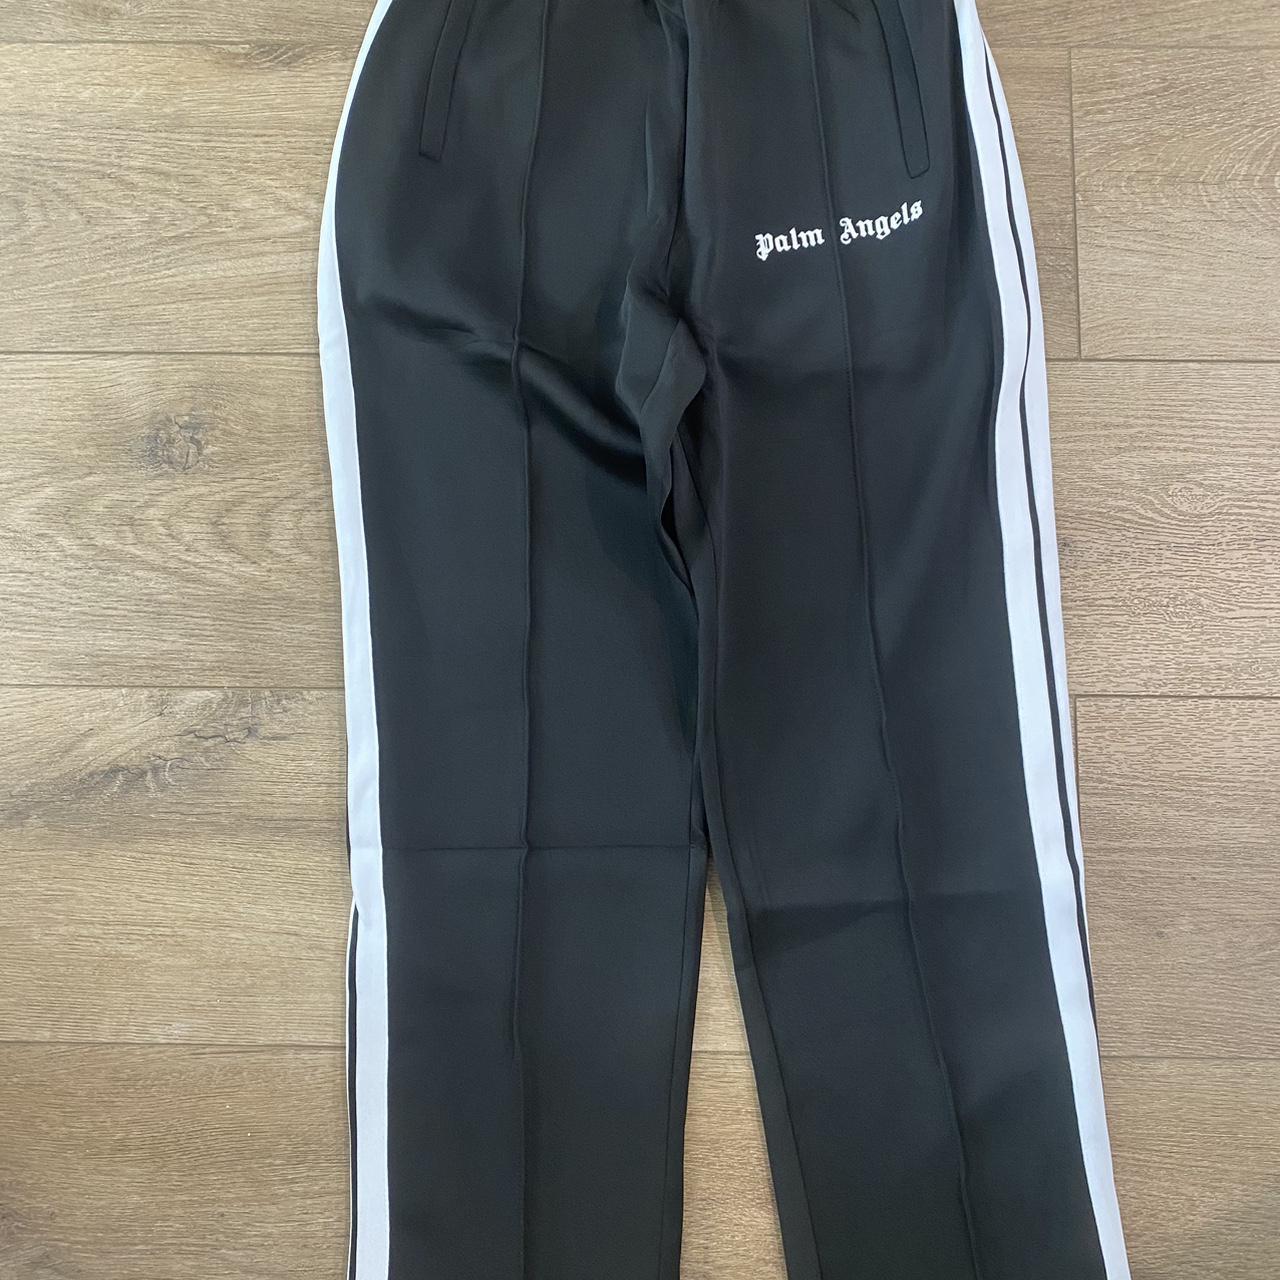 Brand new palm angles tracksuit pants only Size medium - Depop